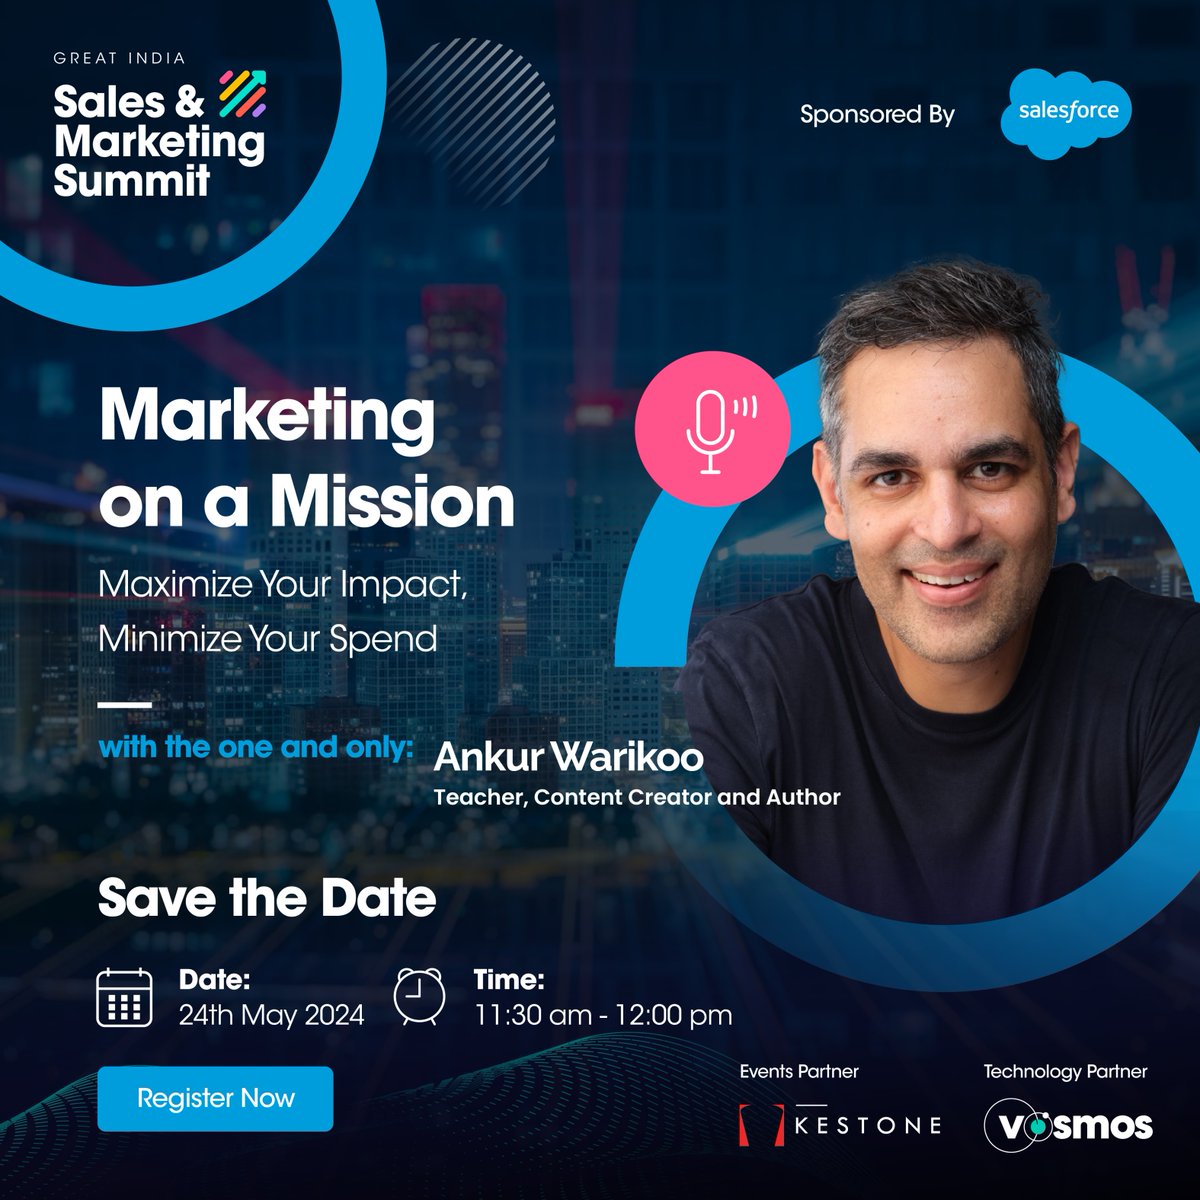 Gear up for an extraordinary session with the iconic Ankur Warikoo at the Great India Sales & Marketing Summit 2024! Register today to catch him live: bit.ly/4a9BhjN 📅 24th May 2024 ⏰ 11:30 am - 12:00 pm #AnkurWarikoo #GISMS2024 #GreatIndiaSummit #Salesforce